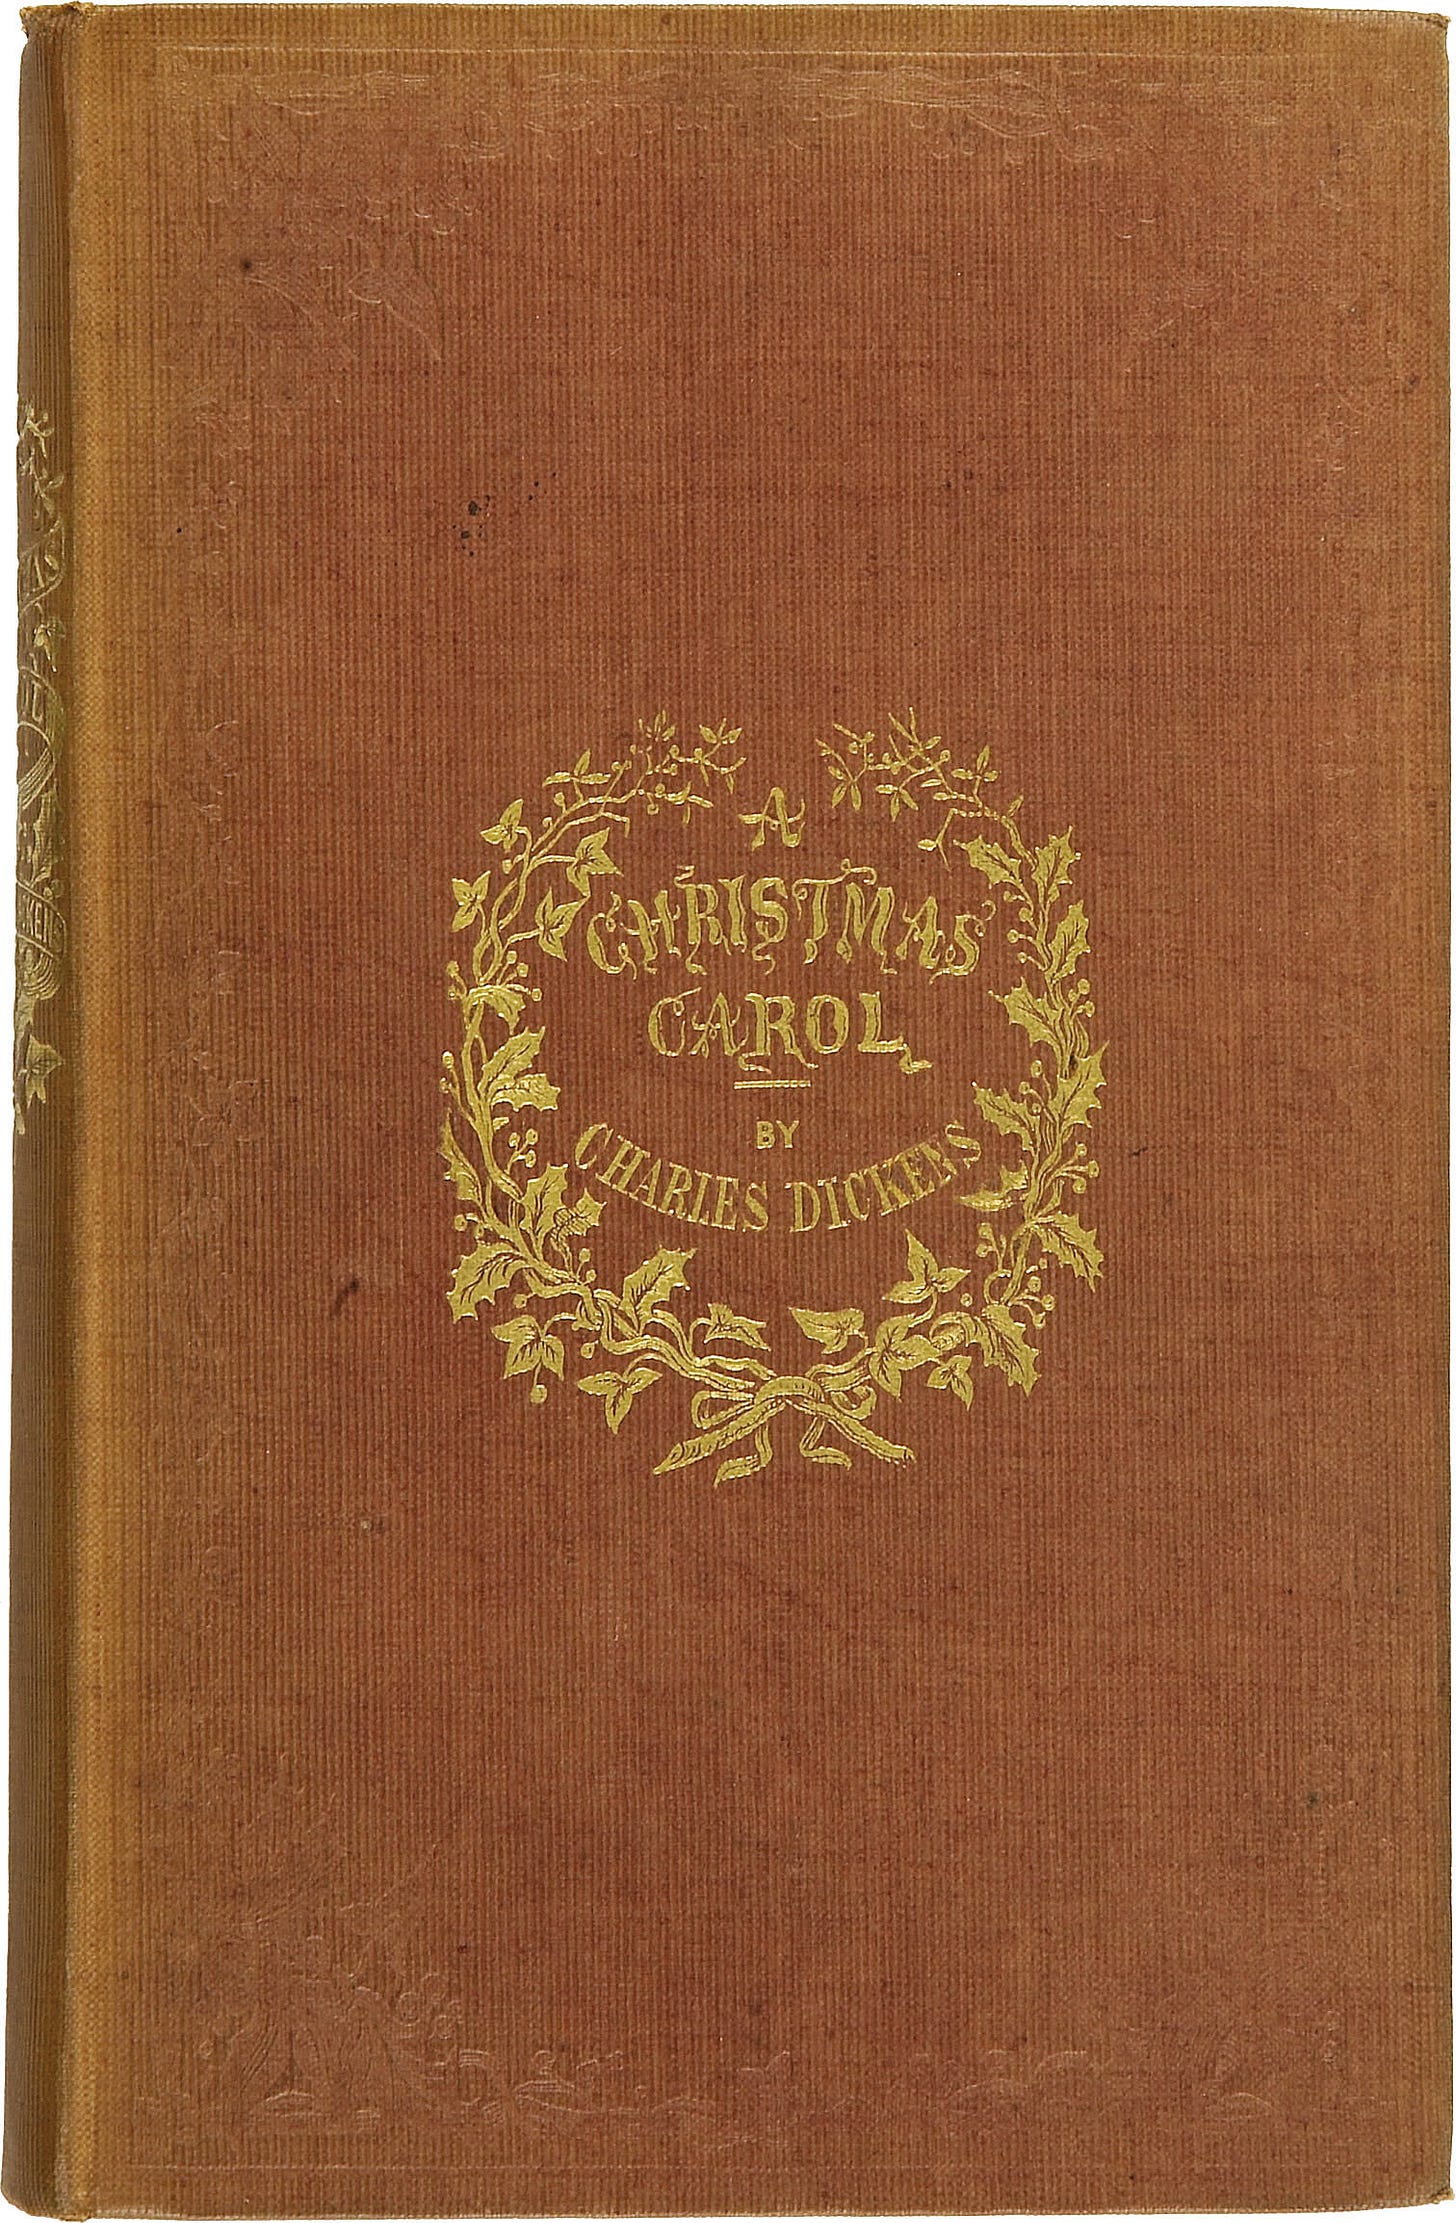 https://upload.wikimedia.org/wikipedia/commons/4/4f/Charles_Dickens-A_Christmas_Carol-Cloth-First_Edition_1843.jpg